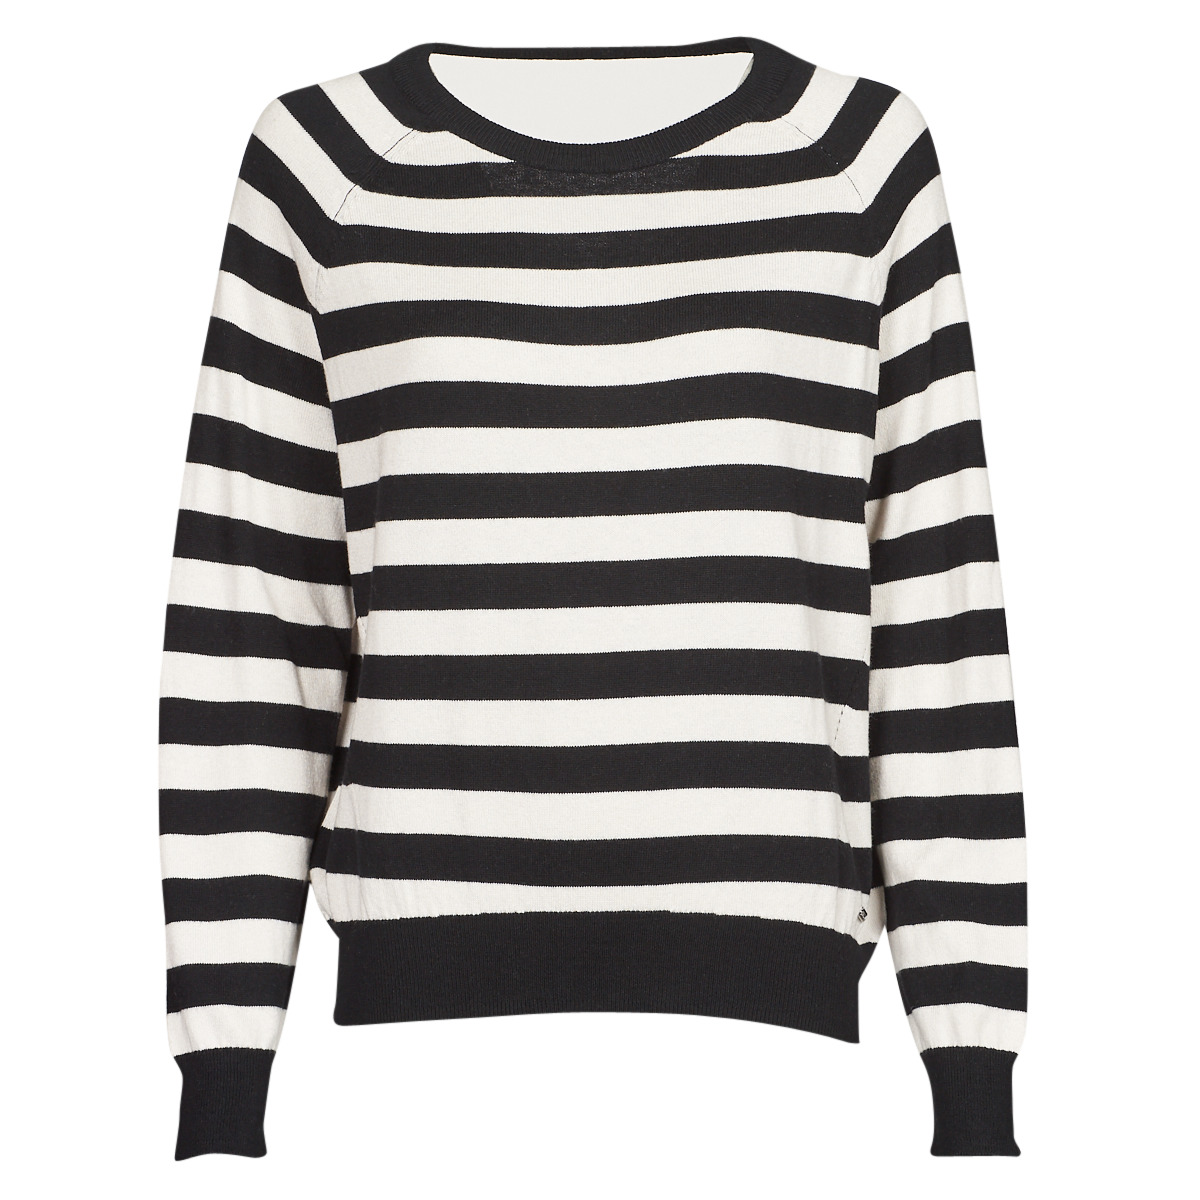 Clothing Women jumpers Guess IRENE RN LS SWTR Black / White